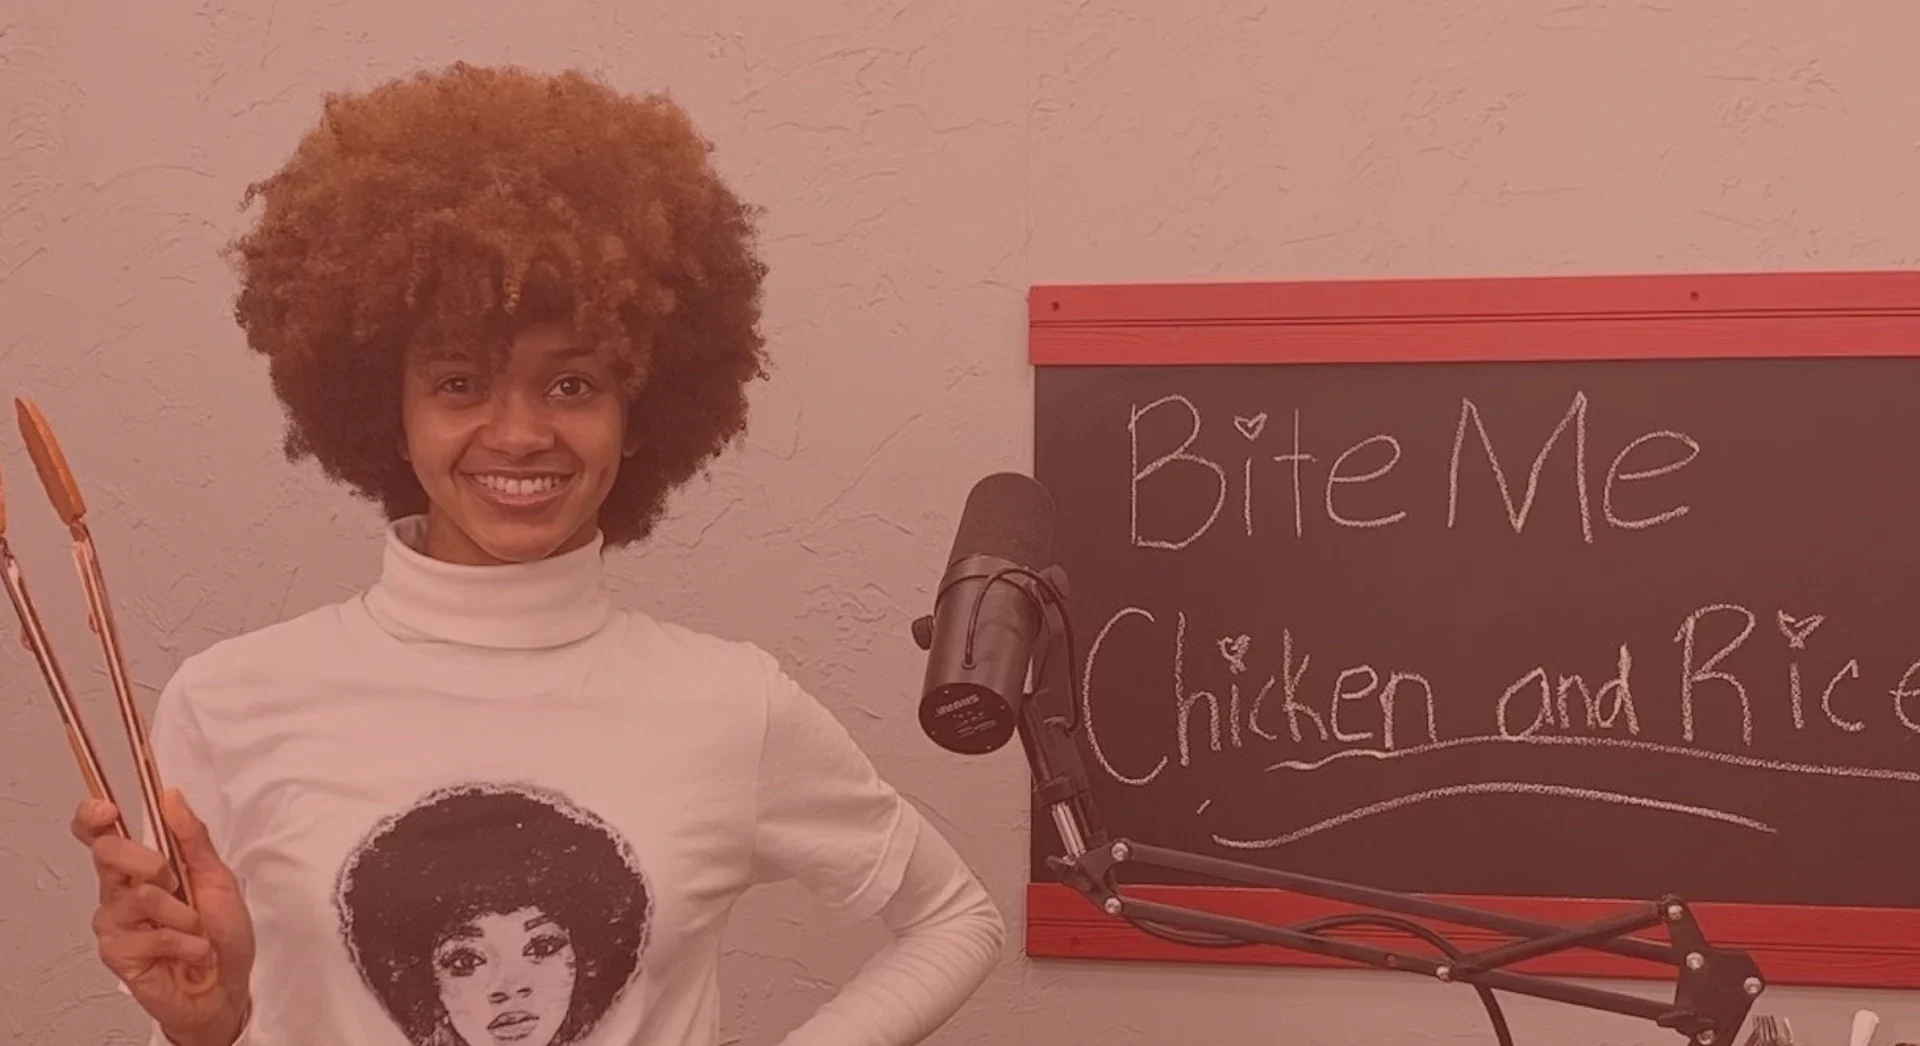 Meet the 23-Year-Old Who Went From Food Allergies To Building Her Own Seasoning Brand